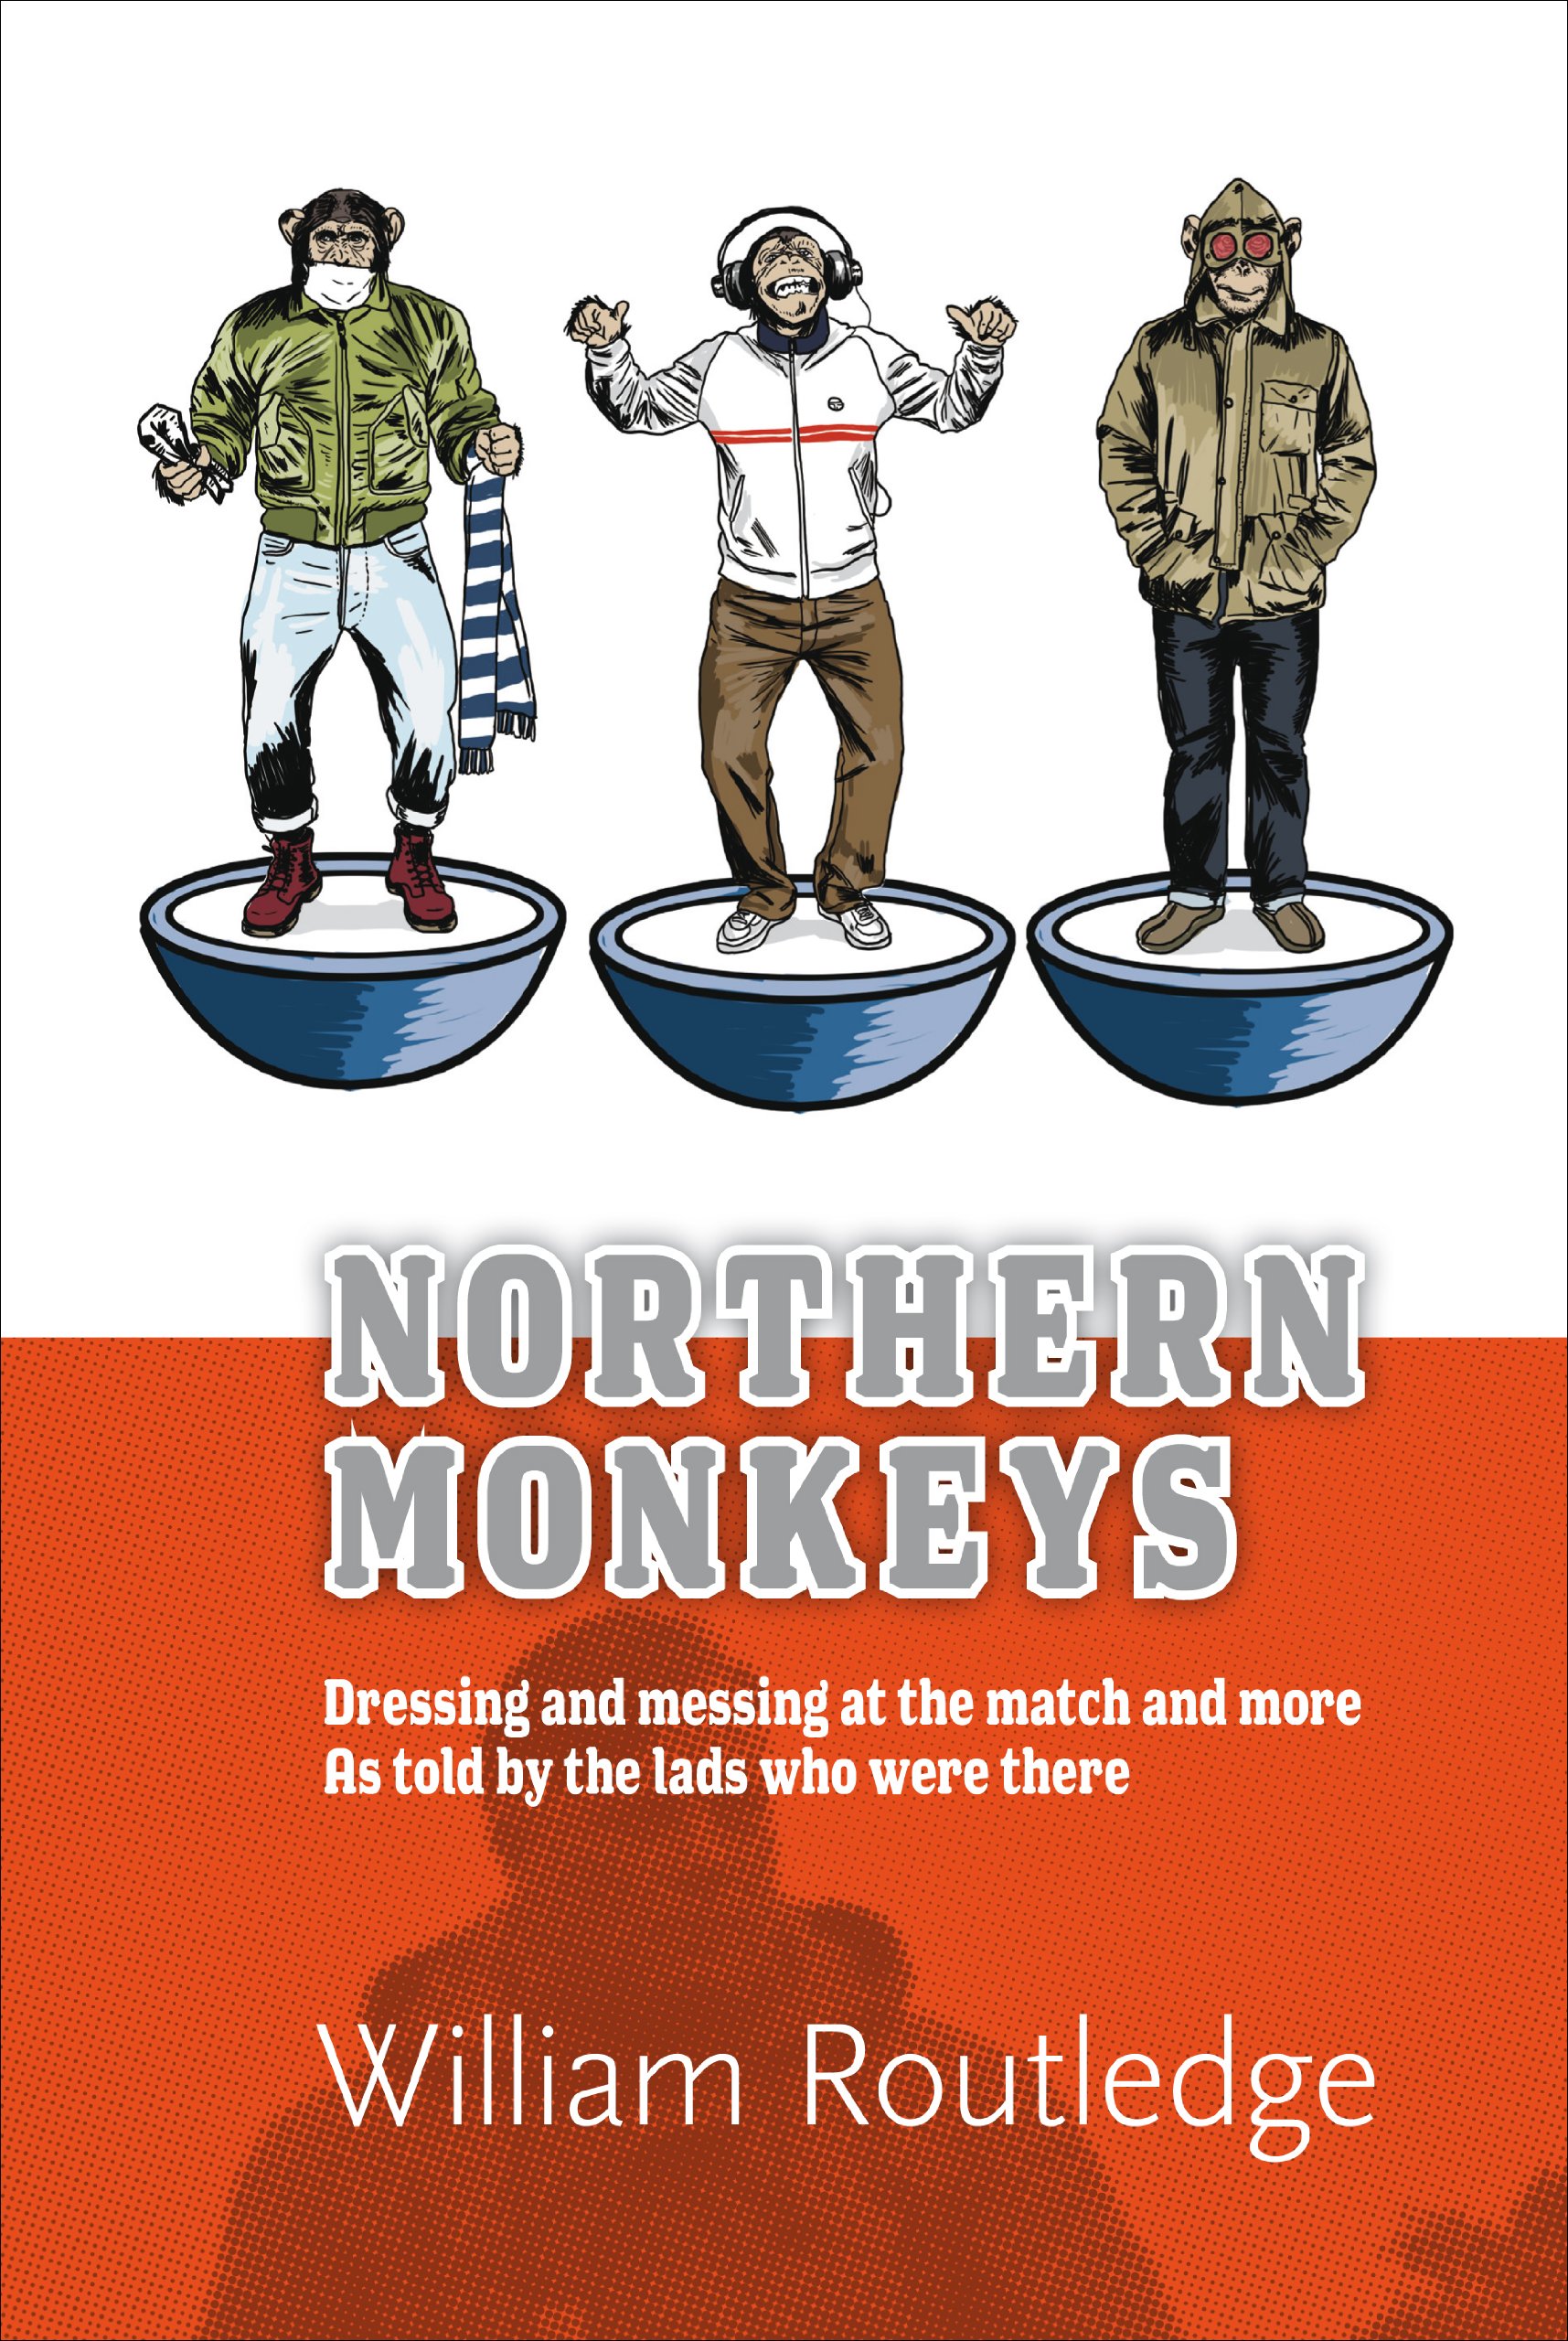 Northern Monkeys: Dressing and messing at the match and more as told by the lads who were there